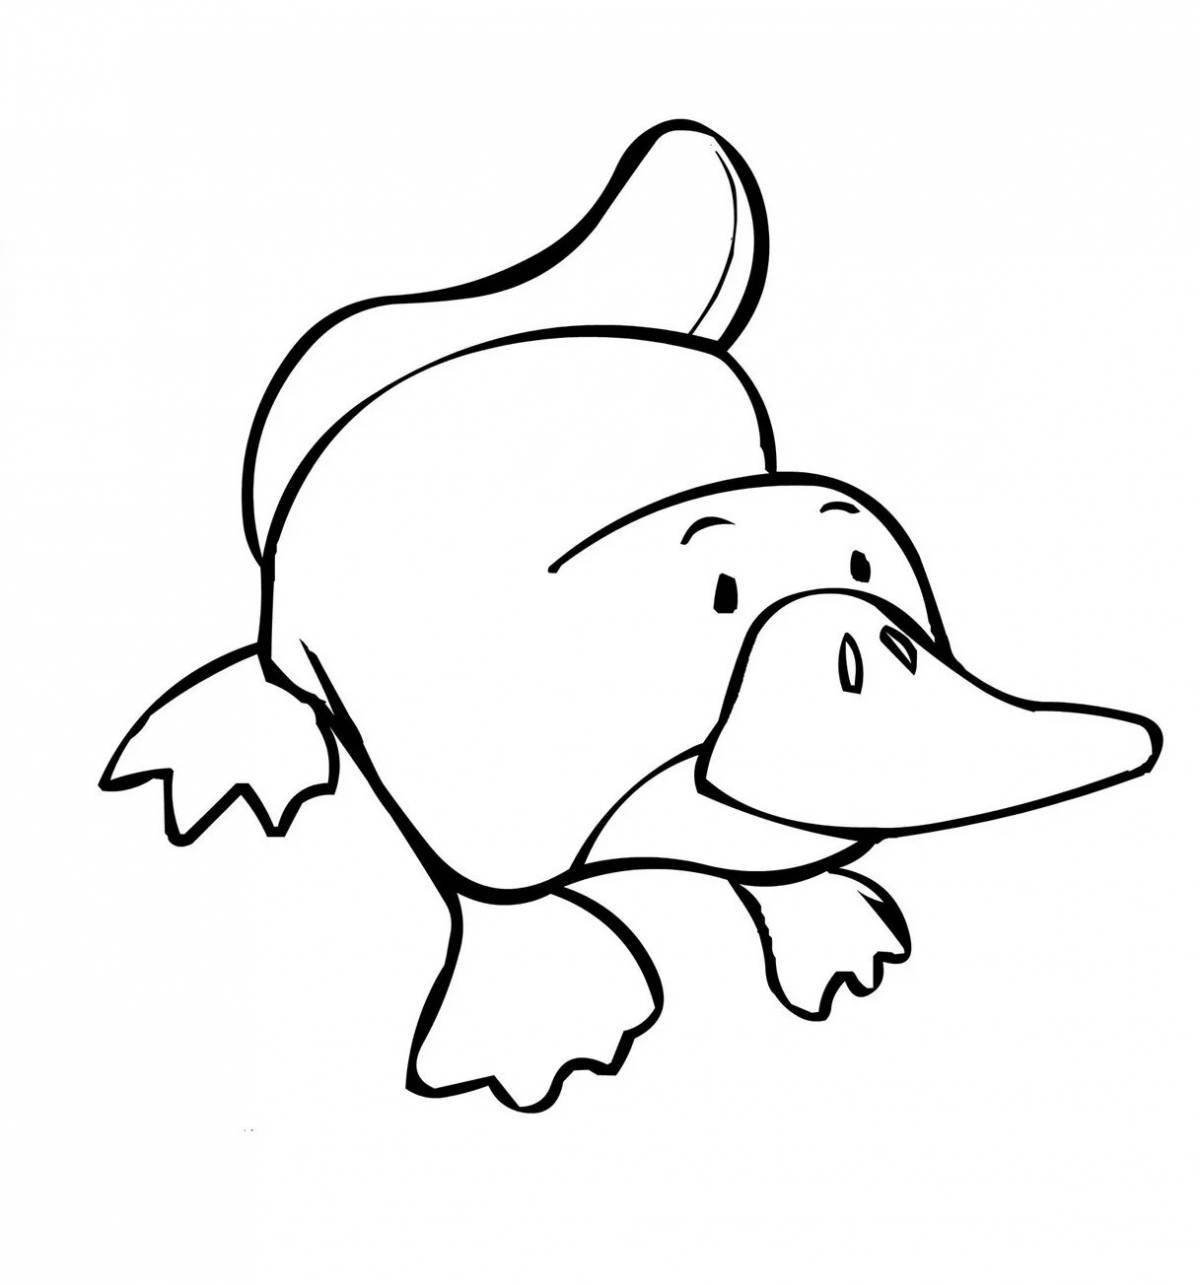 Platypus for kids #5